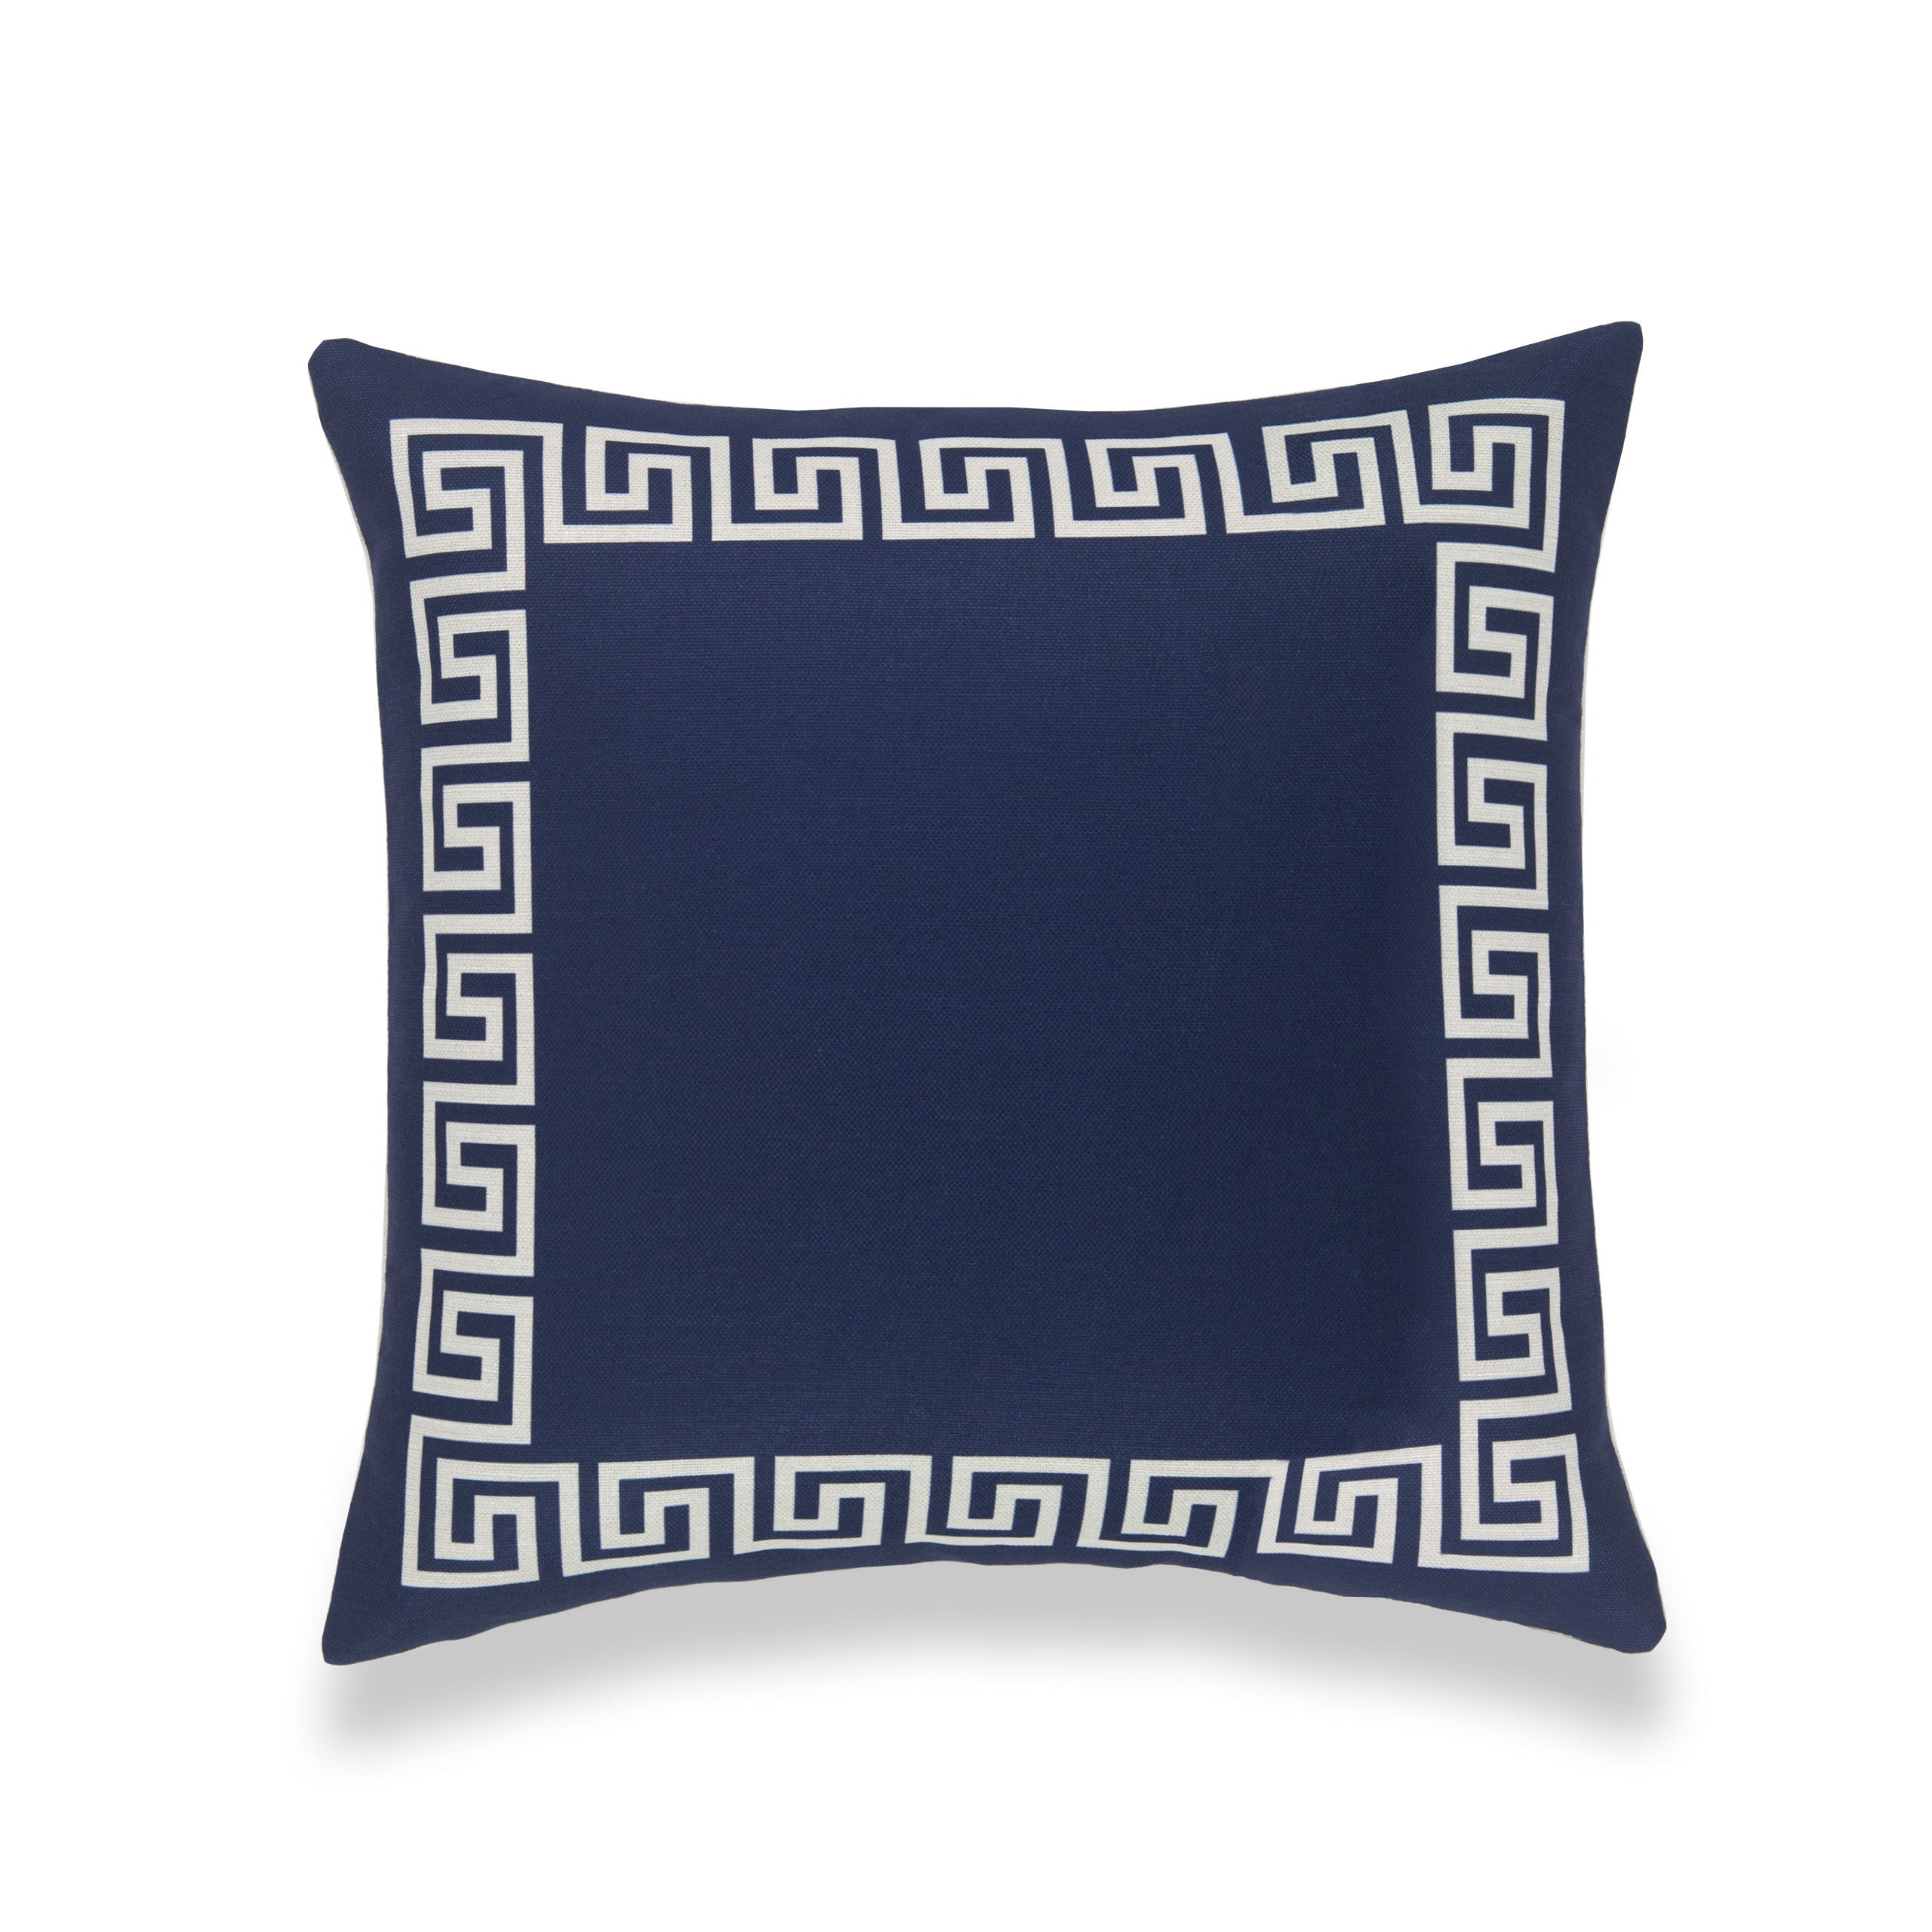 Coastal Indoor Outdoor Pillow Cover, Helicon, Greek Key, Navy Blue, 18"x18"-0